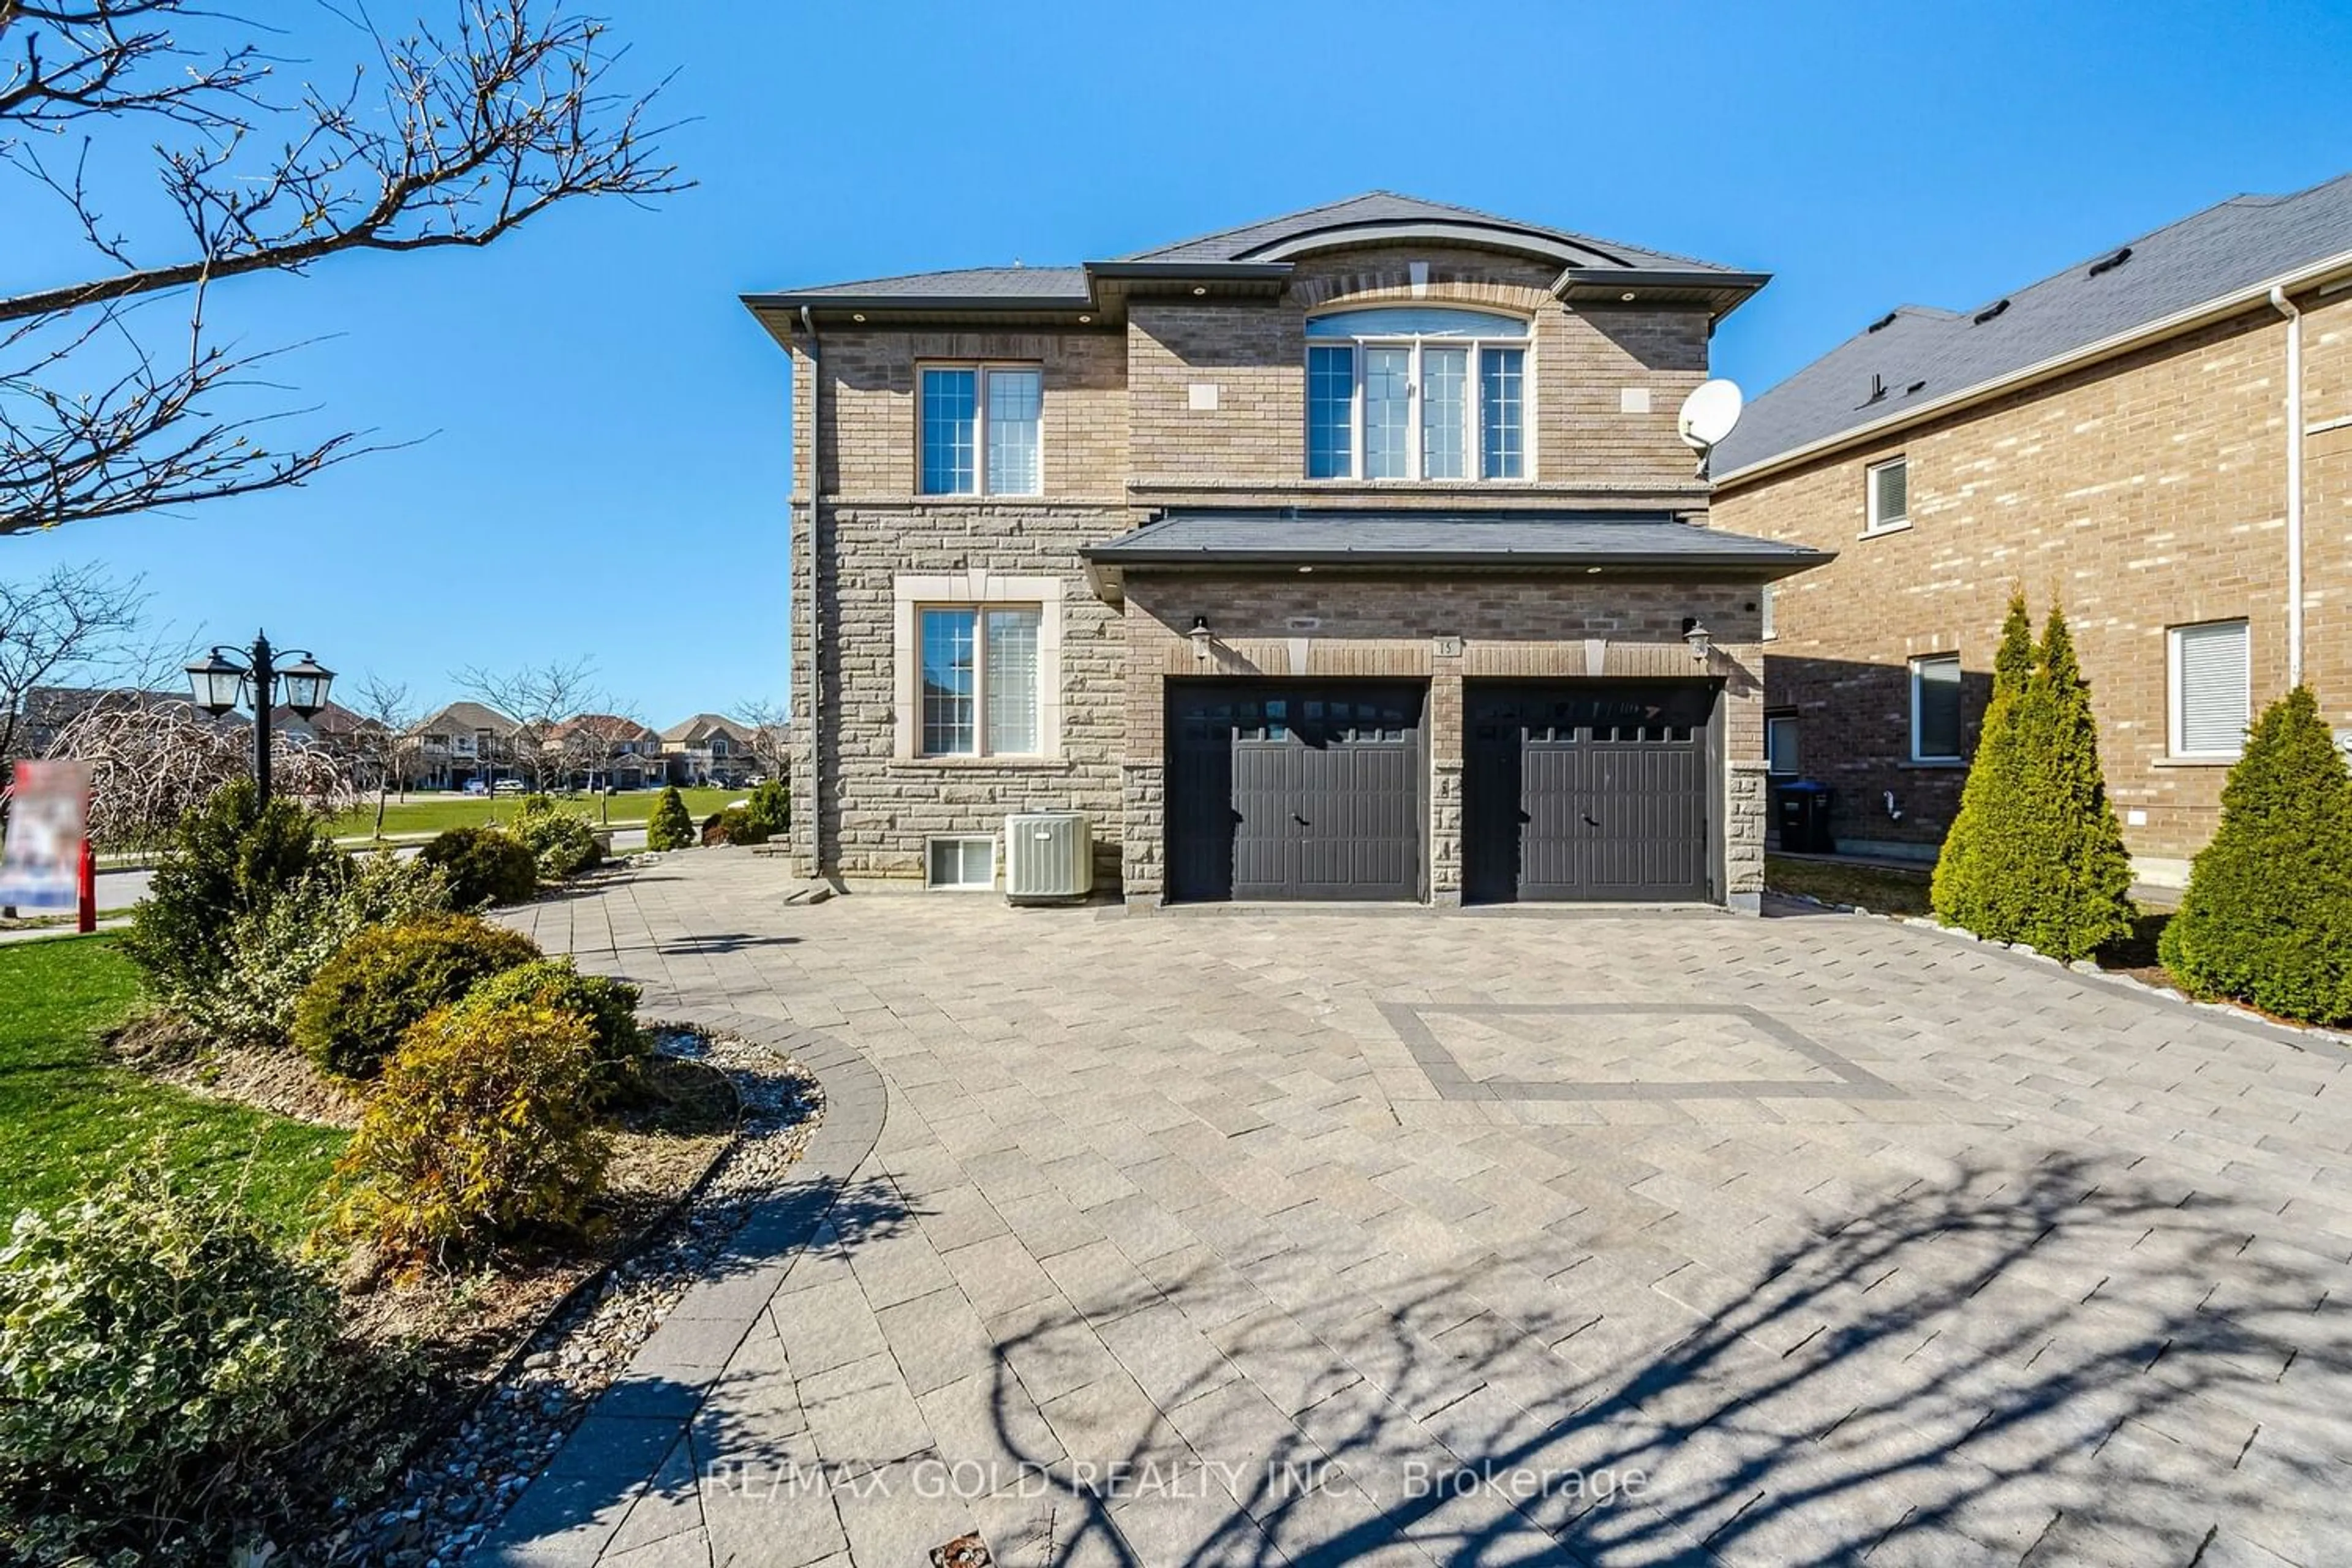 Home with brick exterior material for 15 Gentry Way, Brampton Ontario L6P 3N5